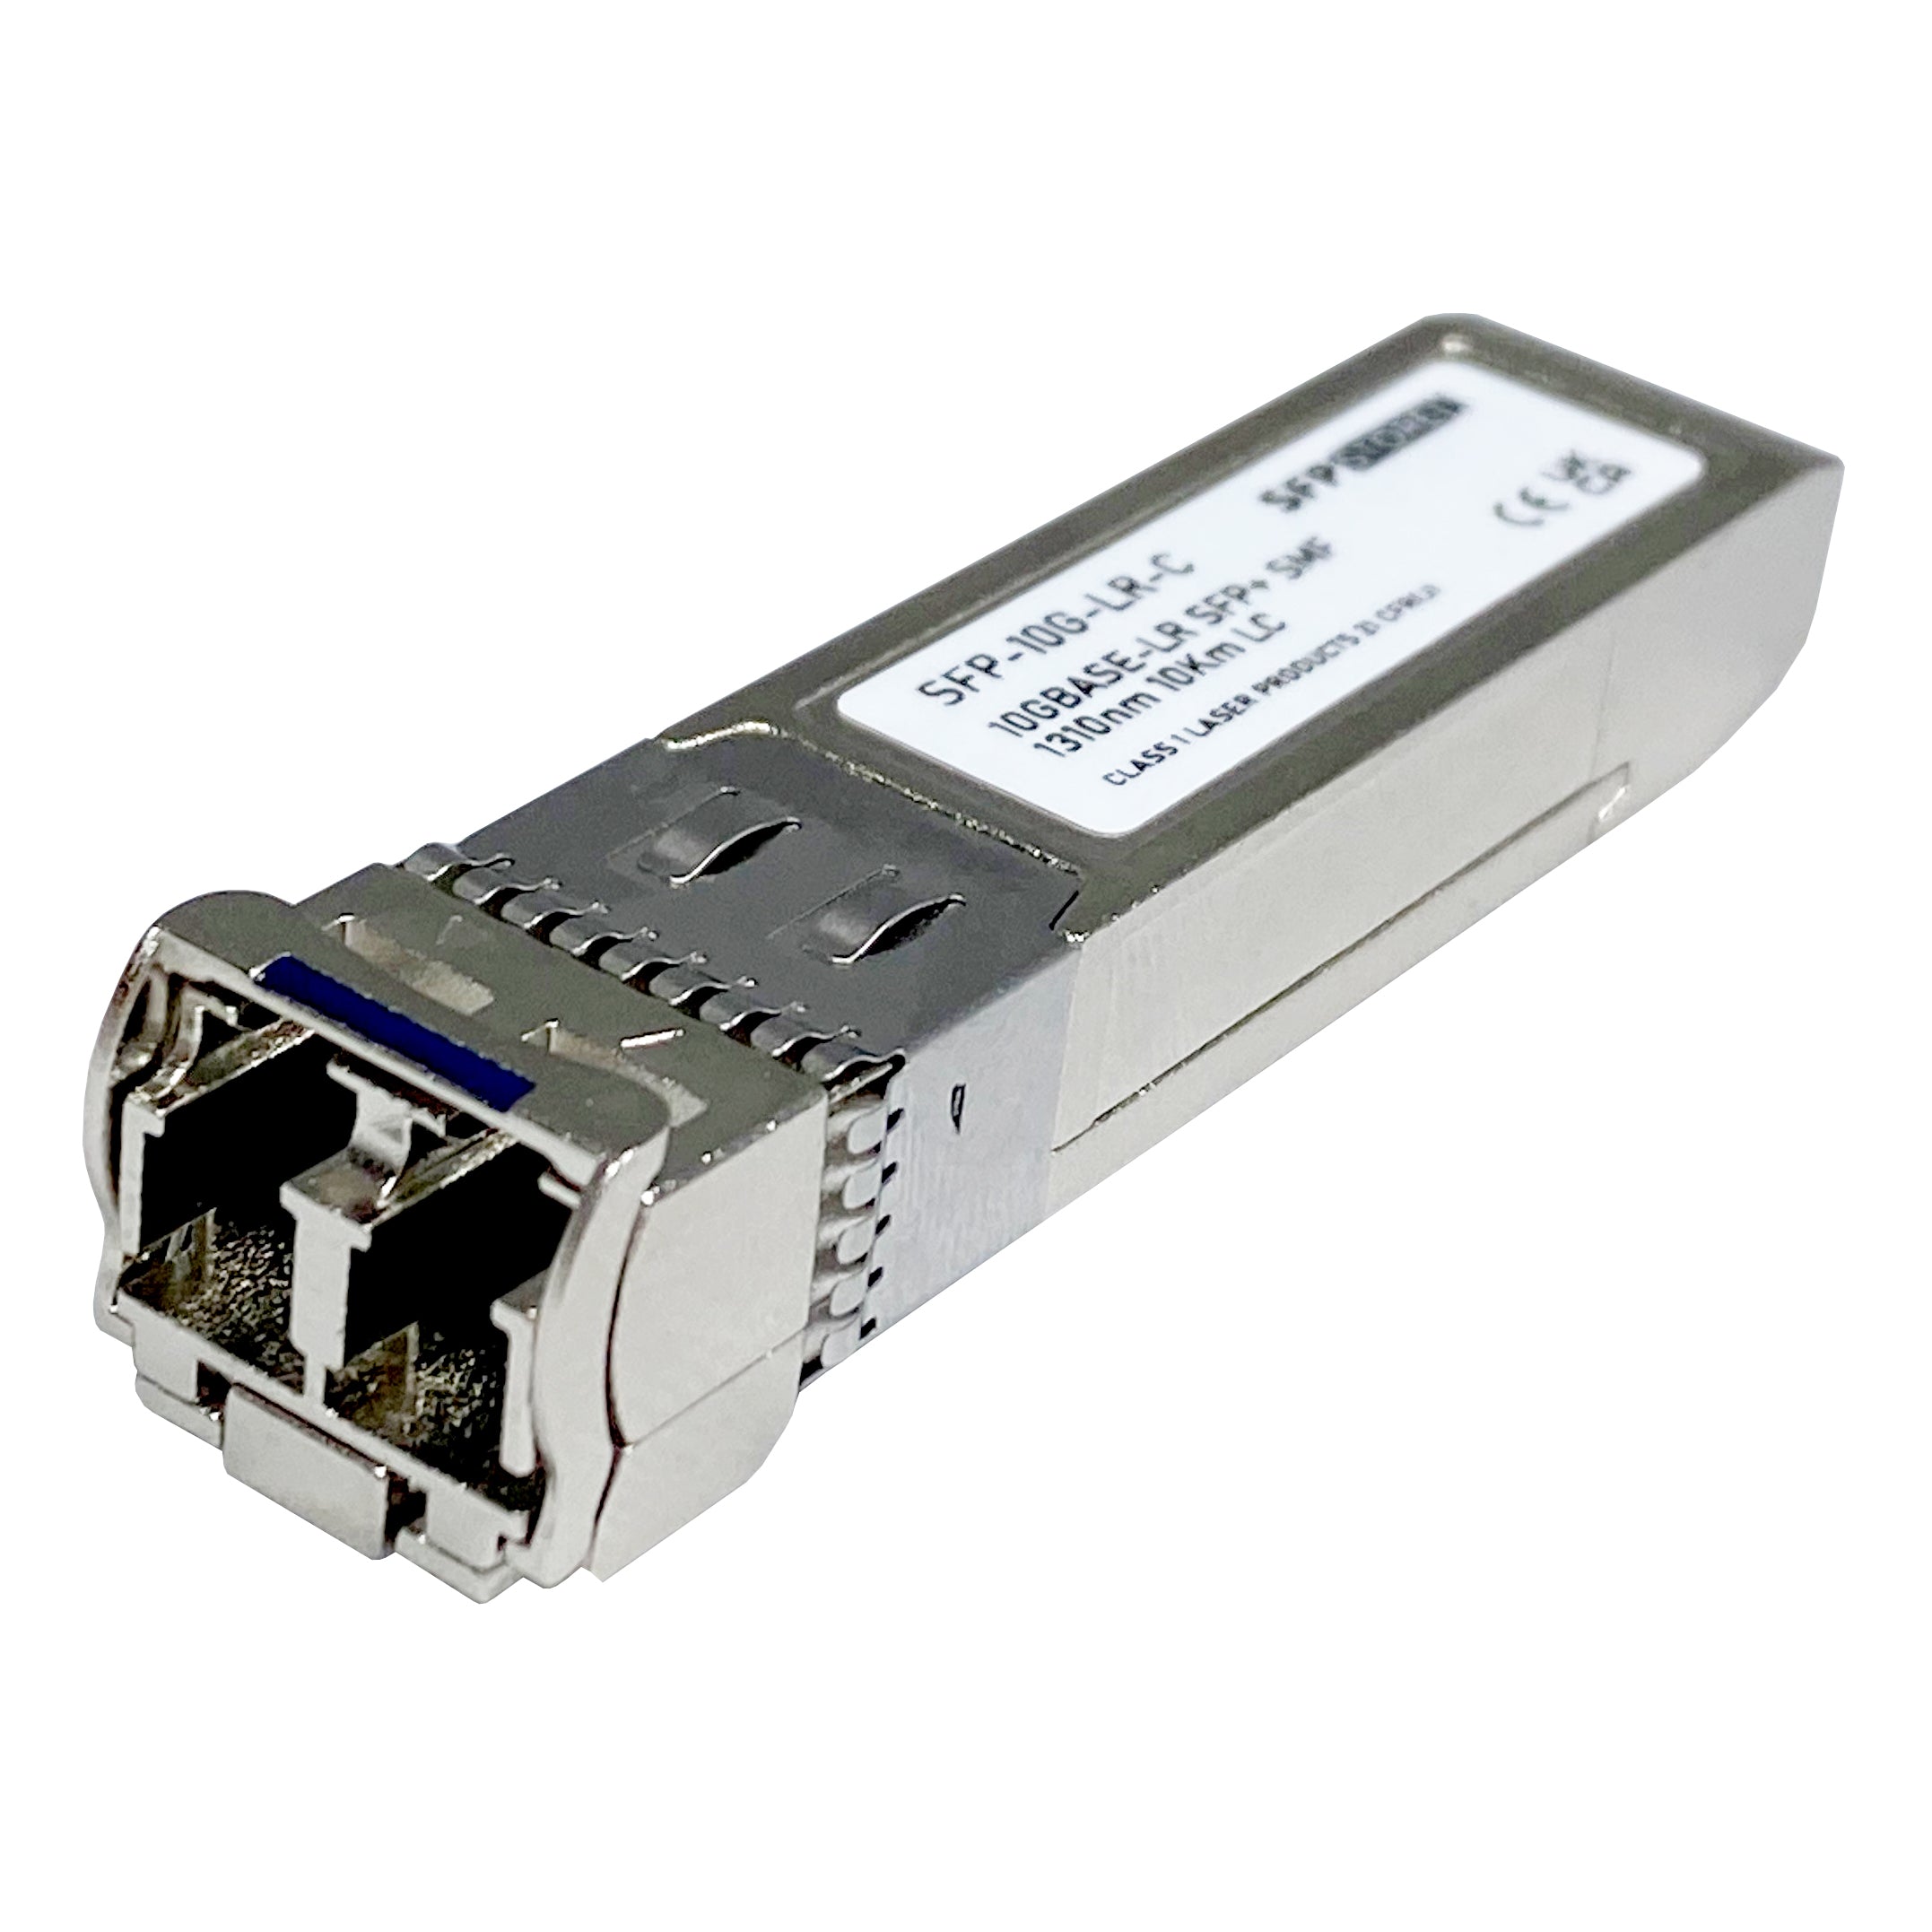 01-SSC-9786-C SonicWall Compatible 10G LR SFP+ LC Transceiver